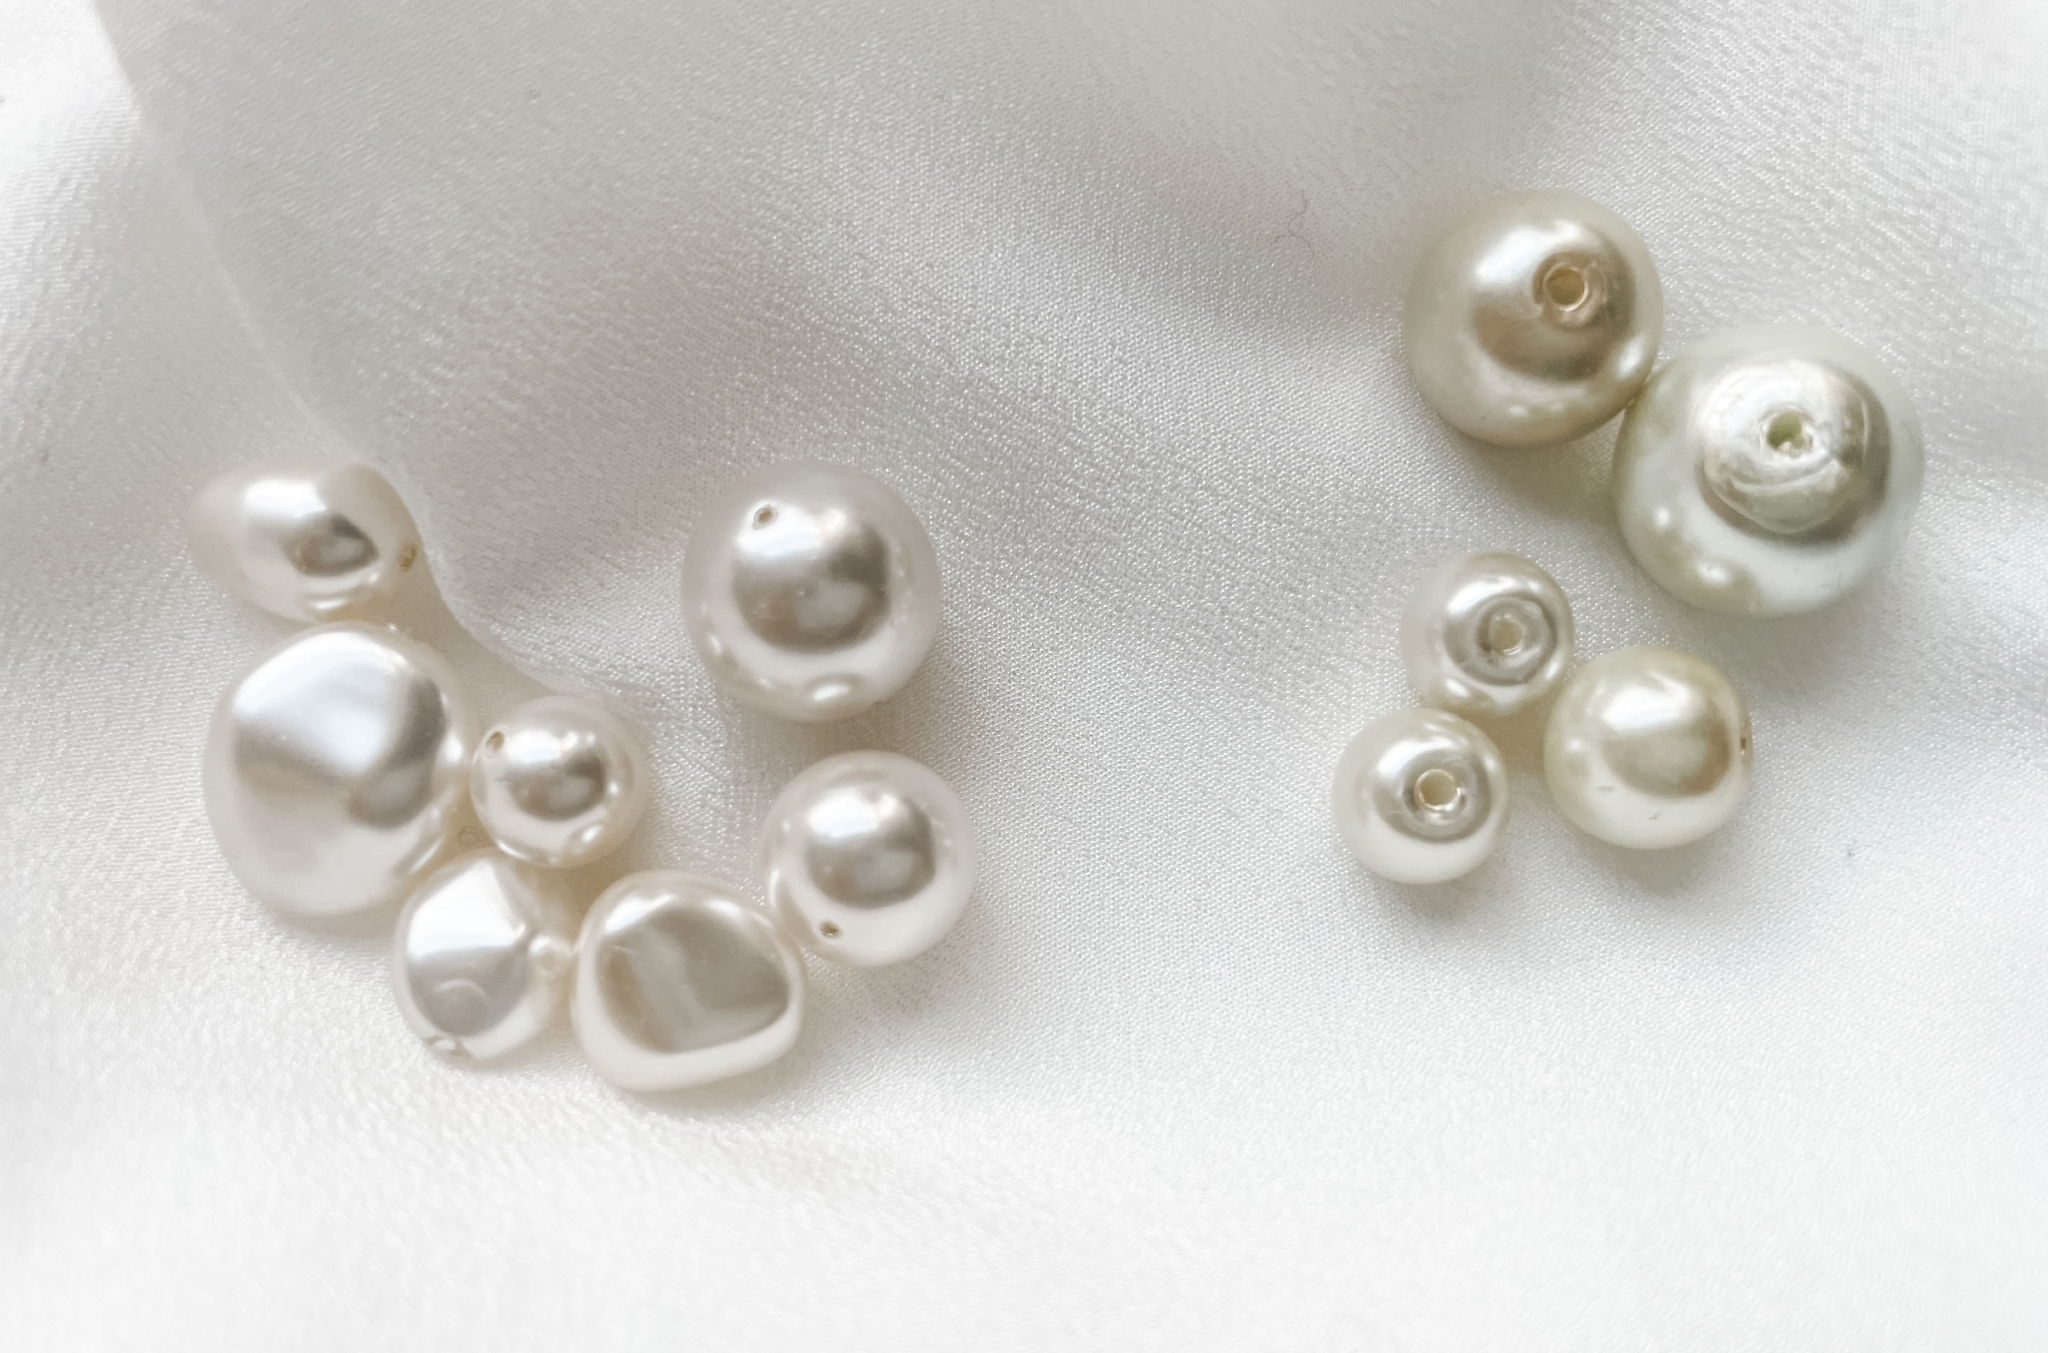 Cheap versus expensive pearls